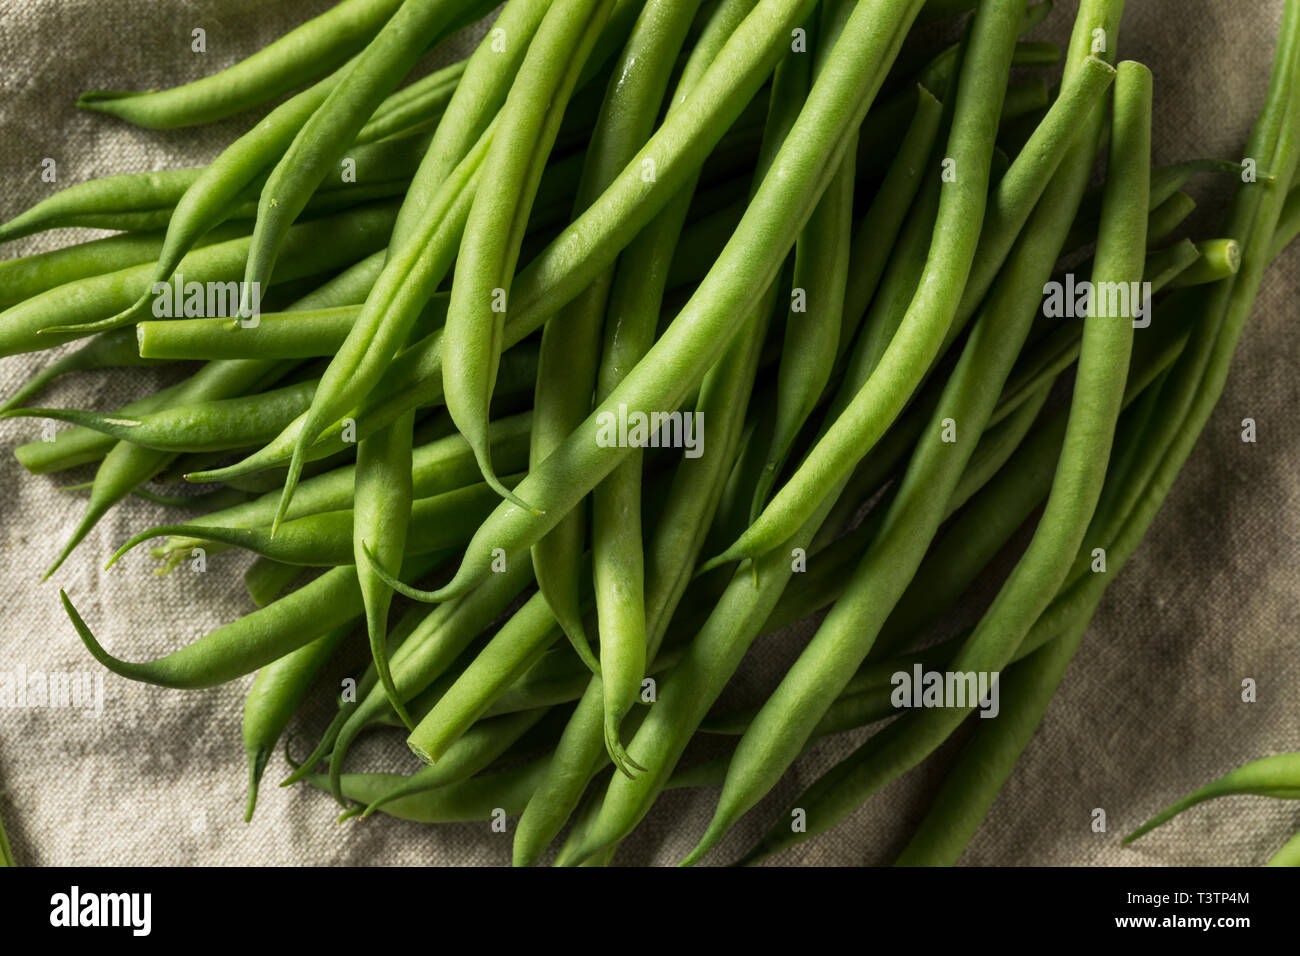 String Beans High Resolution Stock Photography and Images - Alamy